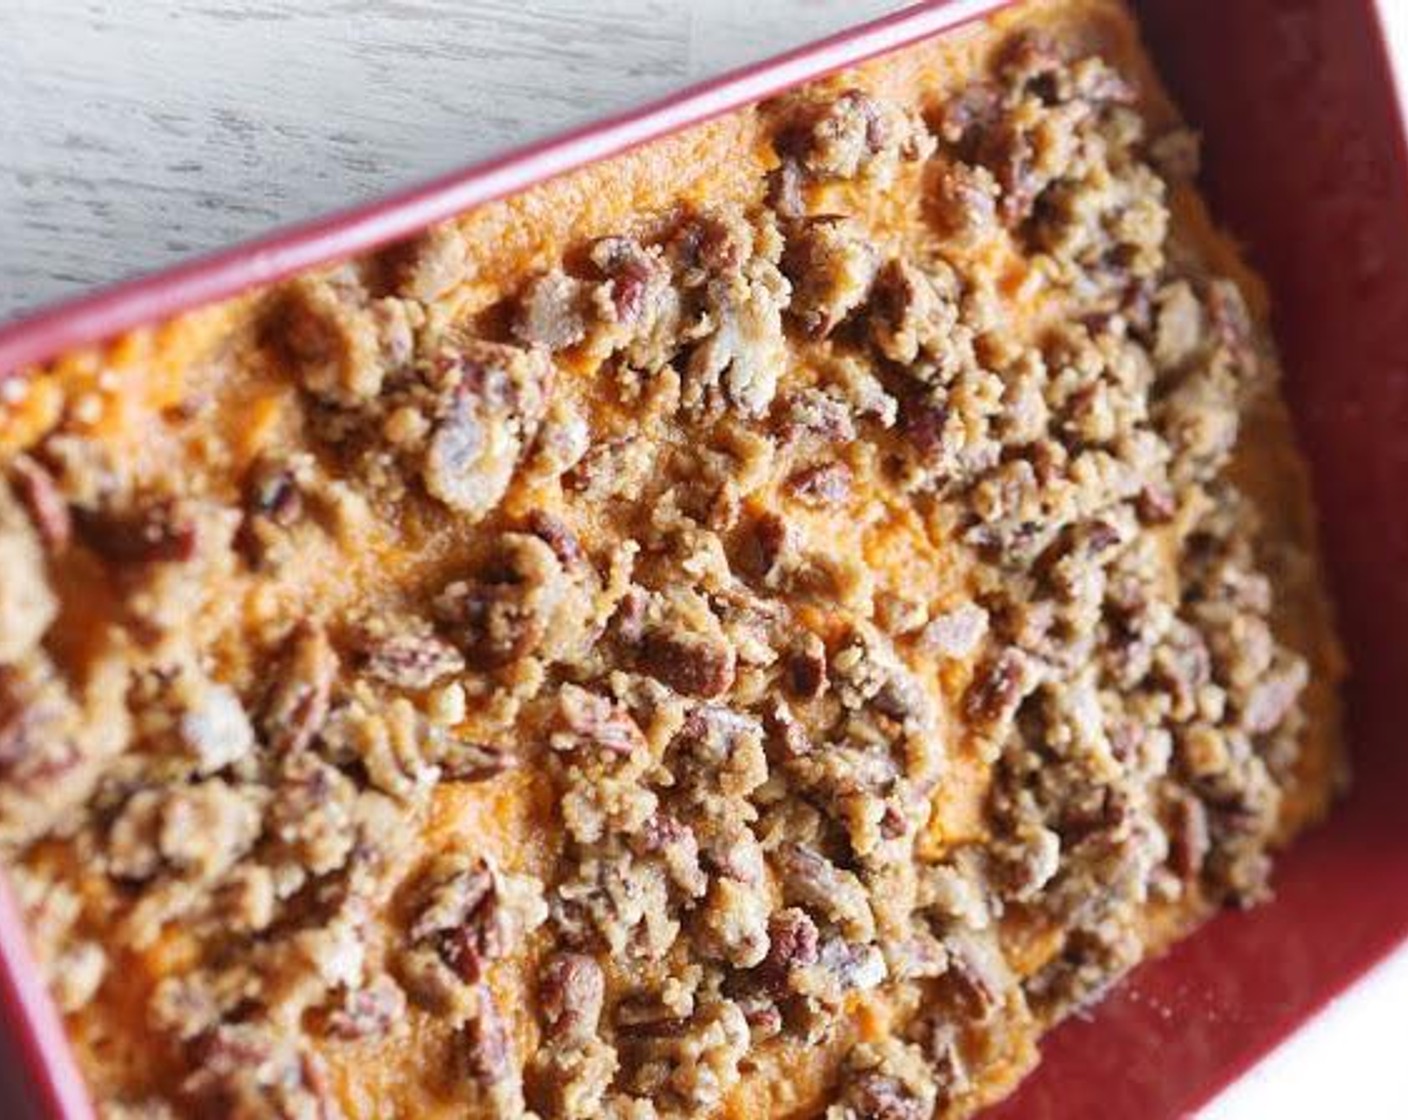 step 4 In a medium bowl, combine the Brown Sugar (1/2 cup), All-Purpose Flour (1/2 cup), Pecans (1 cup), and Butter (1/2 stick). Mix and pour evenly over sweet potatoes. Bake in the preheated oven for 20 minutes.